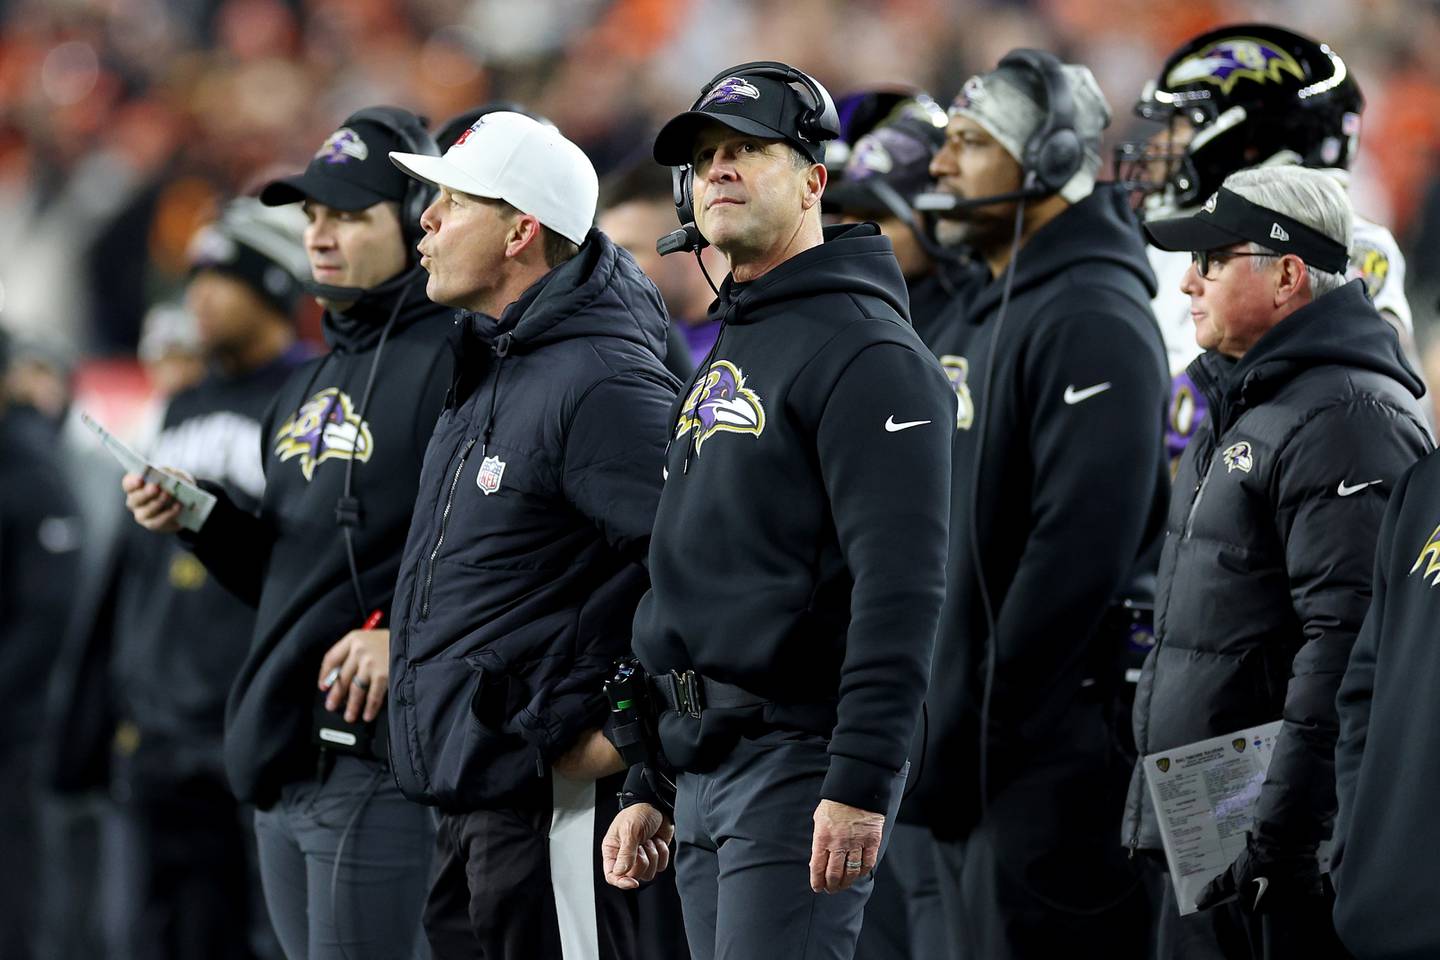 CINCINNATI, OHIO - JANUARY 15: Head coach John Harbaugh of the Baltimore Ravens reacts from the sidelines against the Cincinnati Bengals during the second quarter in the AFC Wild Card playoff game at Paycor Stadium on January 15, 2023 in Cincinnati, Ohio.